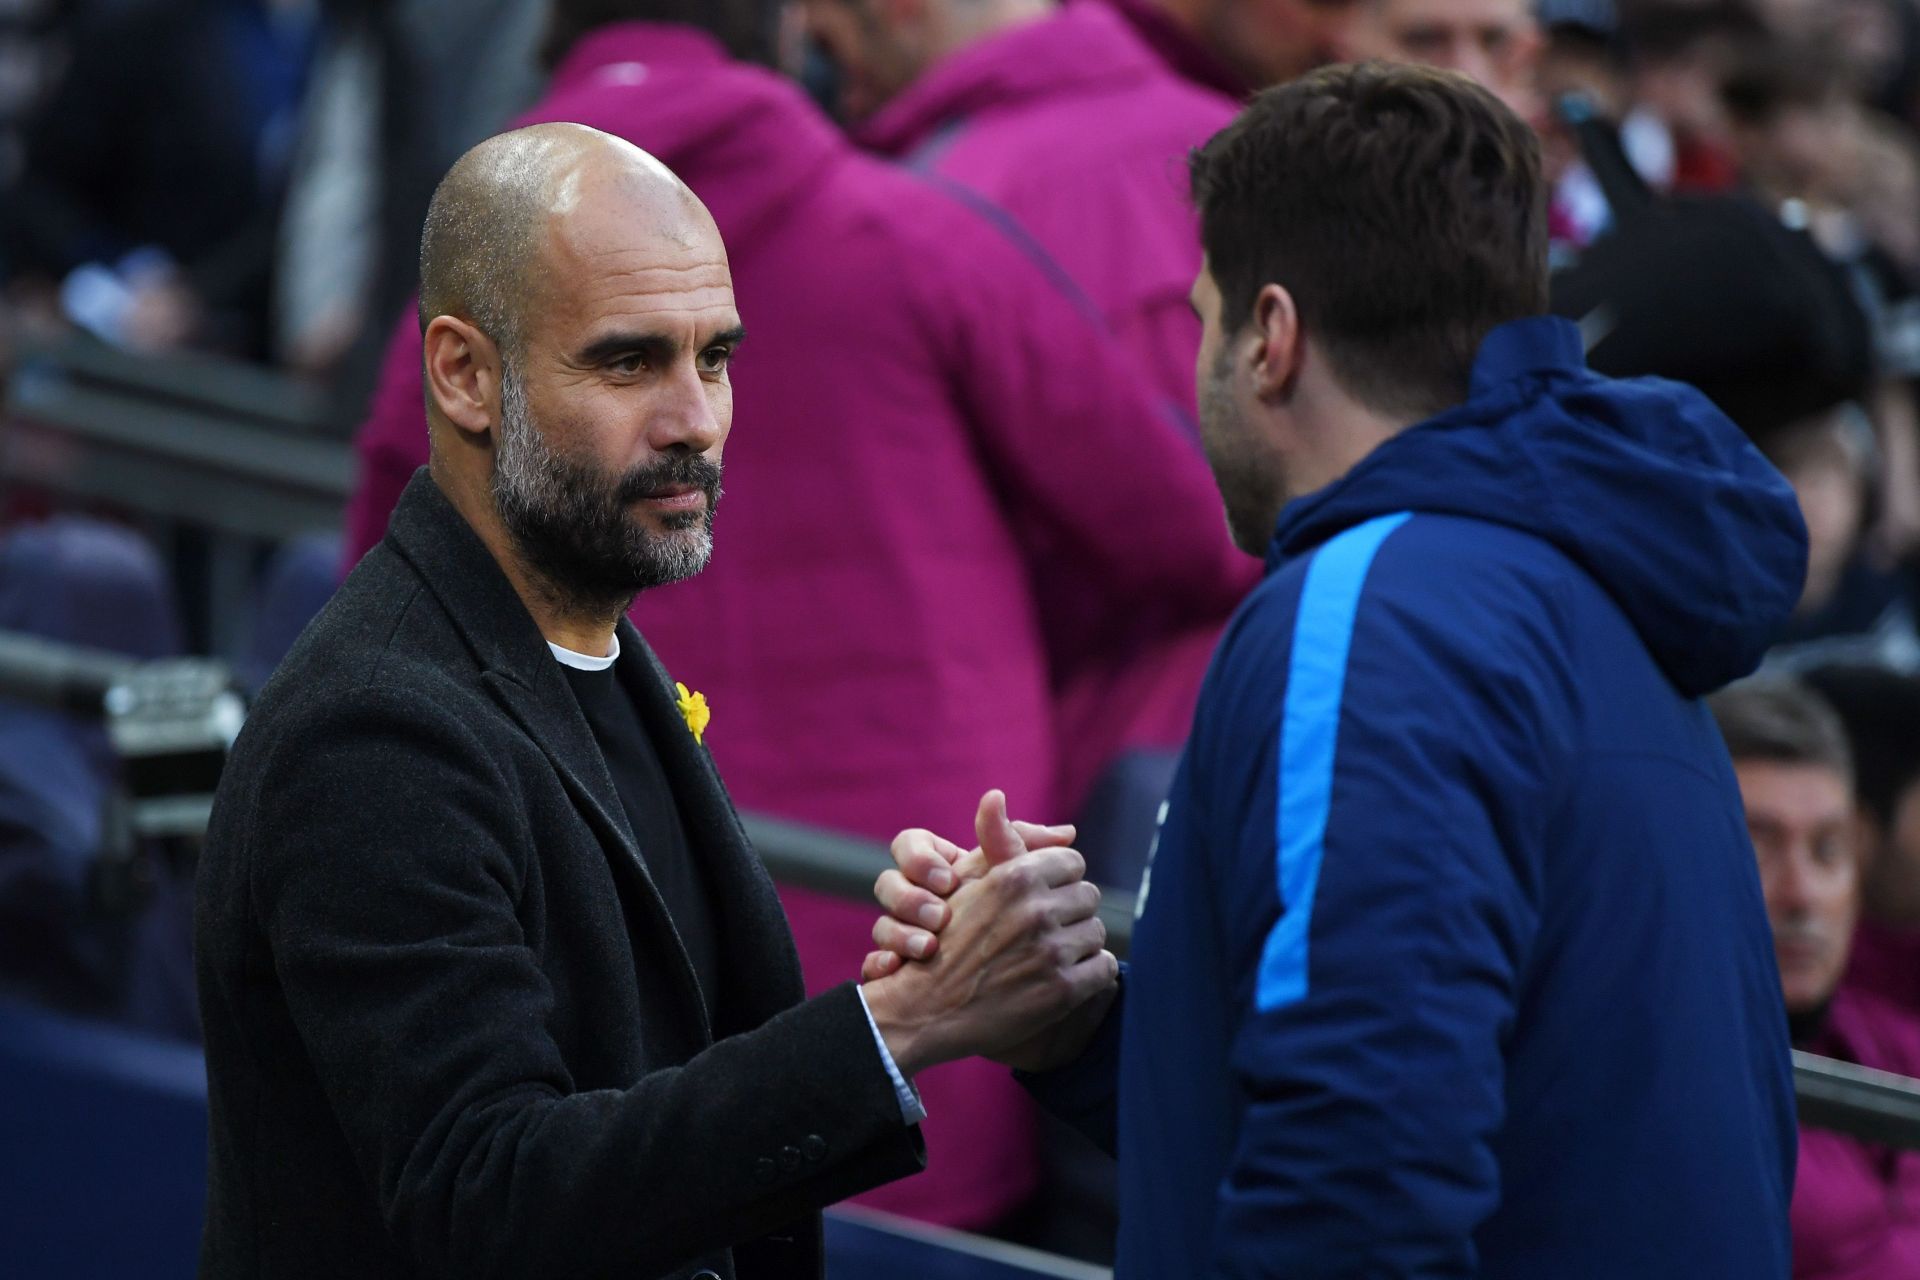 The managerial duo will lock horns at Manchester City and Chelsea this season.